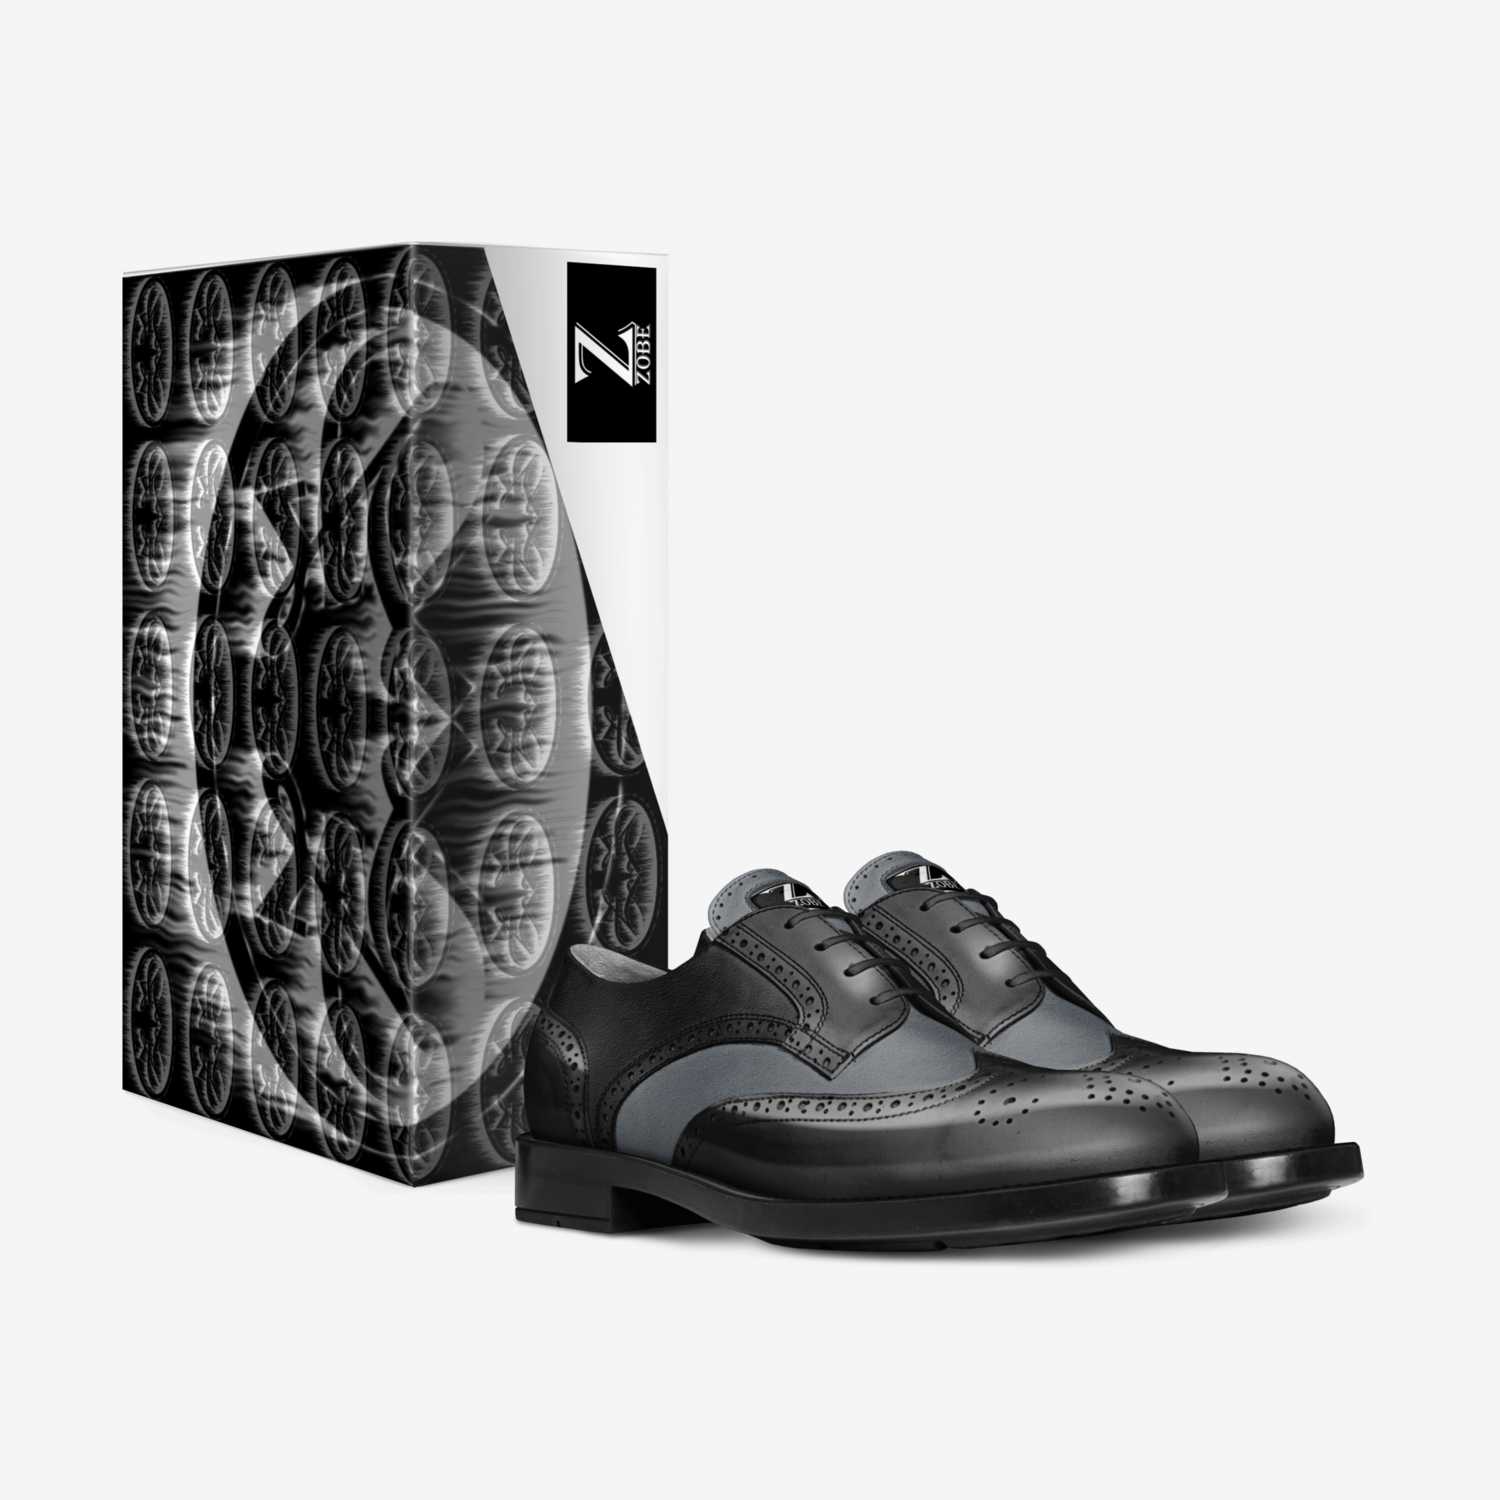 Zobe Class custom made in Italy shoes by Alonzo Black | Box view